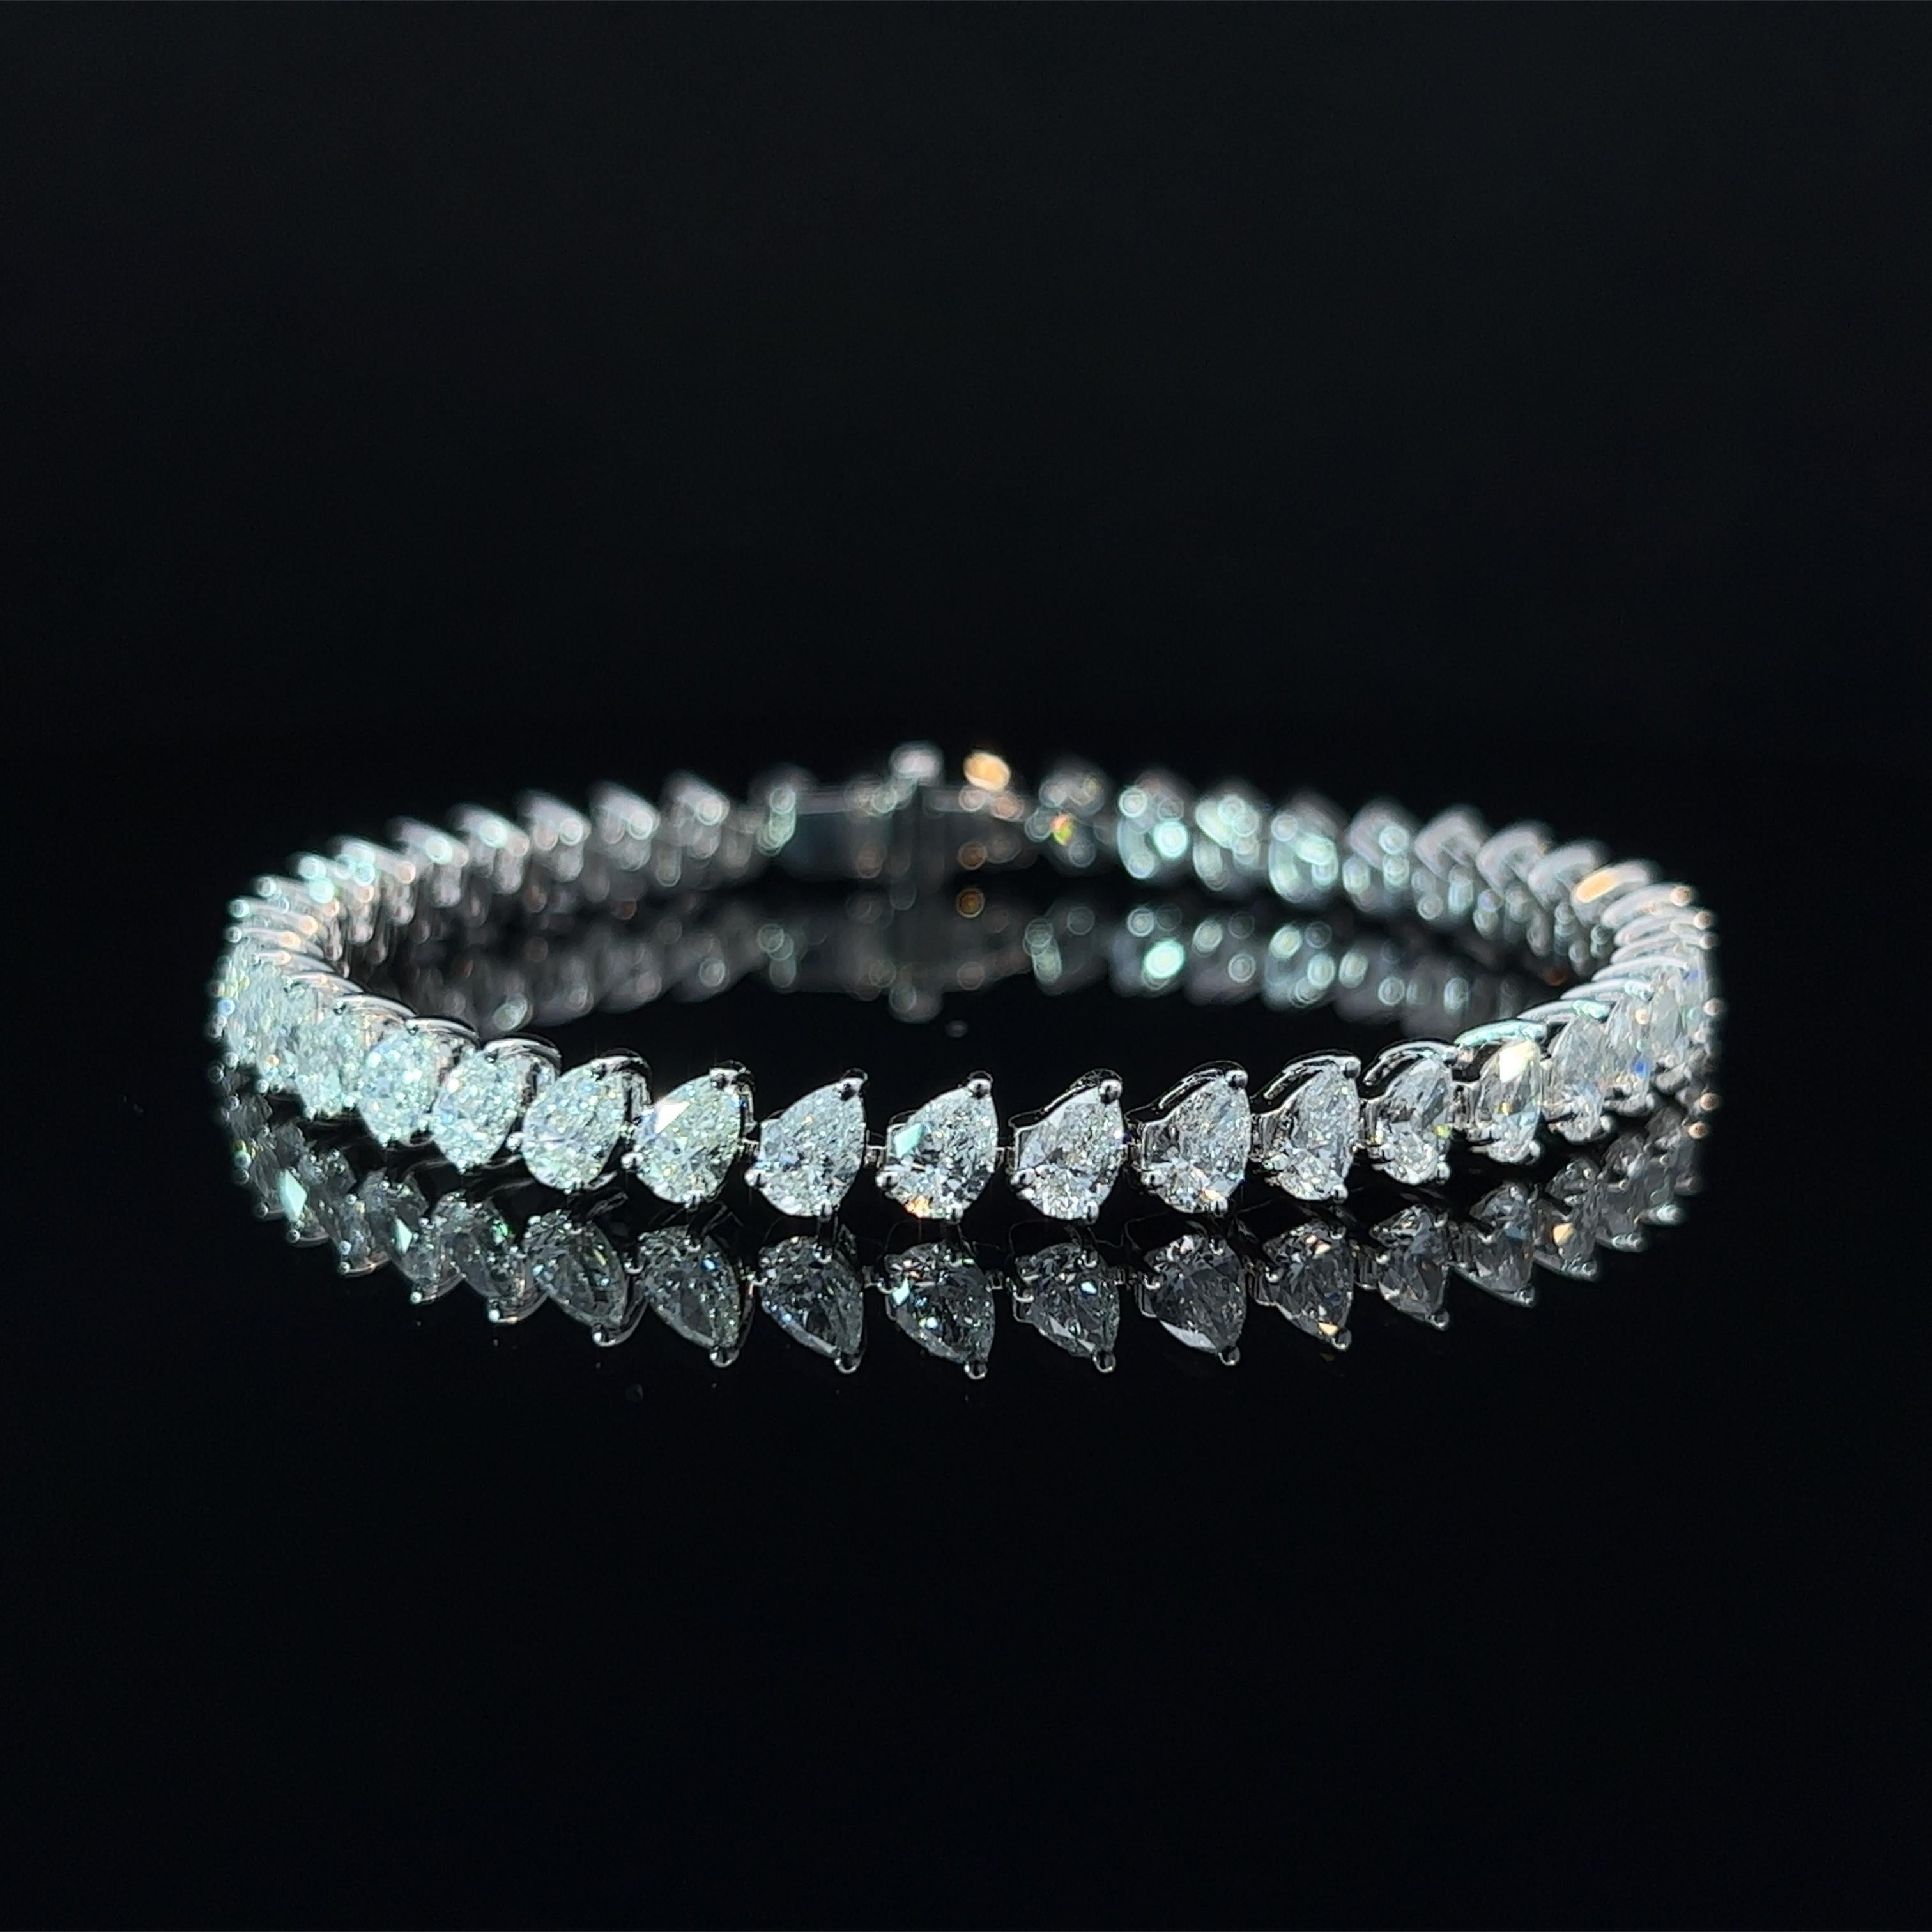 Diamond Shape: Pear Cut 
Total Diamond Weight: 9.94ct
Individual Diamond Weight: .25ct
Color/Clarity: GH SI  
Metal: 18K White Gold  
Metal Weight: 15.02g 

Key Features:

Pear-Cut Diamonds: The centerpiece of this bracelet features a dazzling array